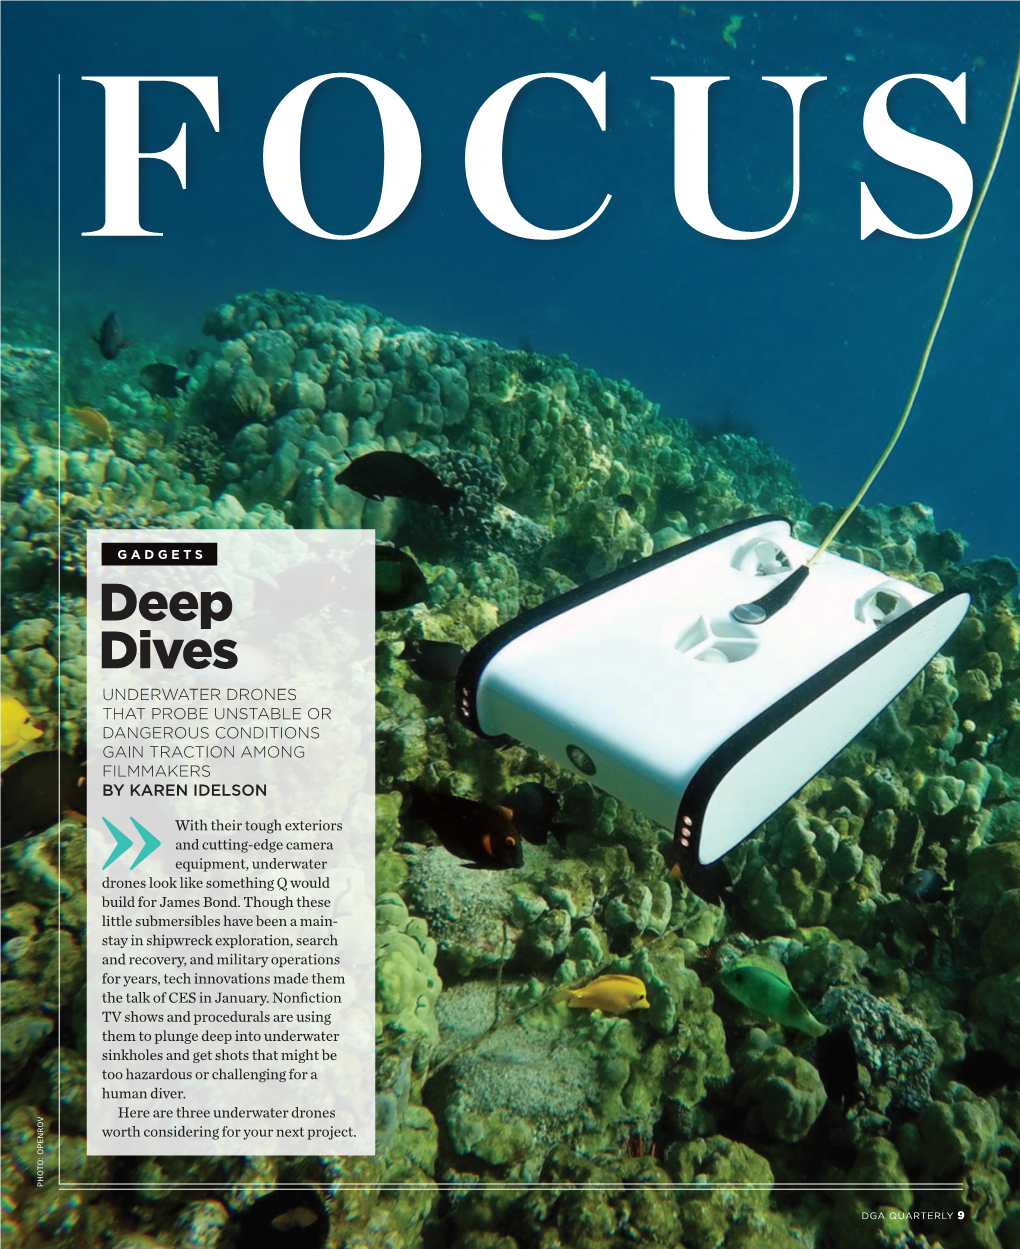 Deep Dives UNDERWATER DRONES THAT PROBE UNSTABLE OR DANGEROUS CONDITIONS GAIN TRACTION AMONG FILMMAKERS by KAREN IDELSON